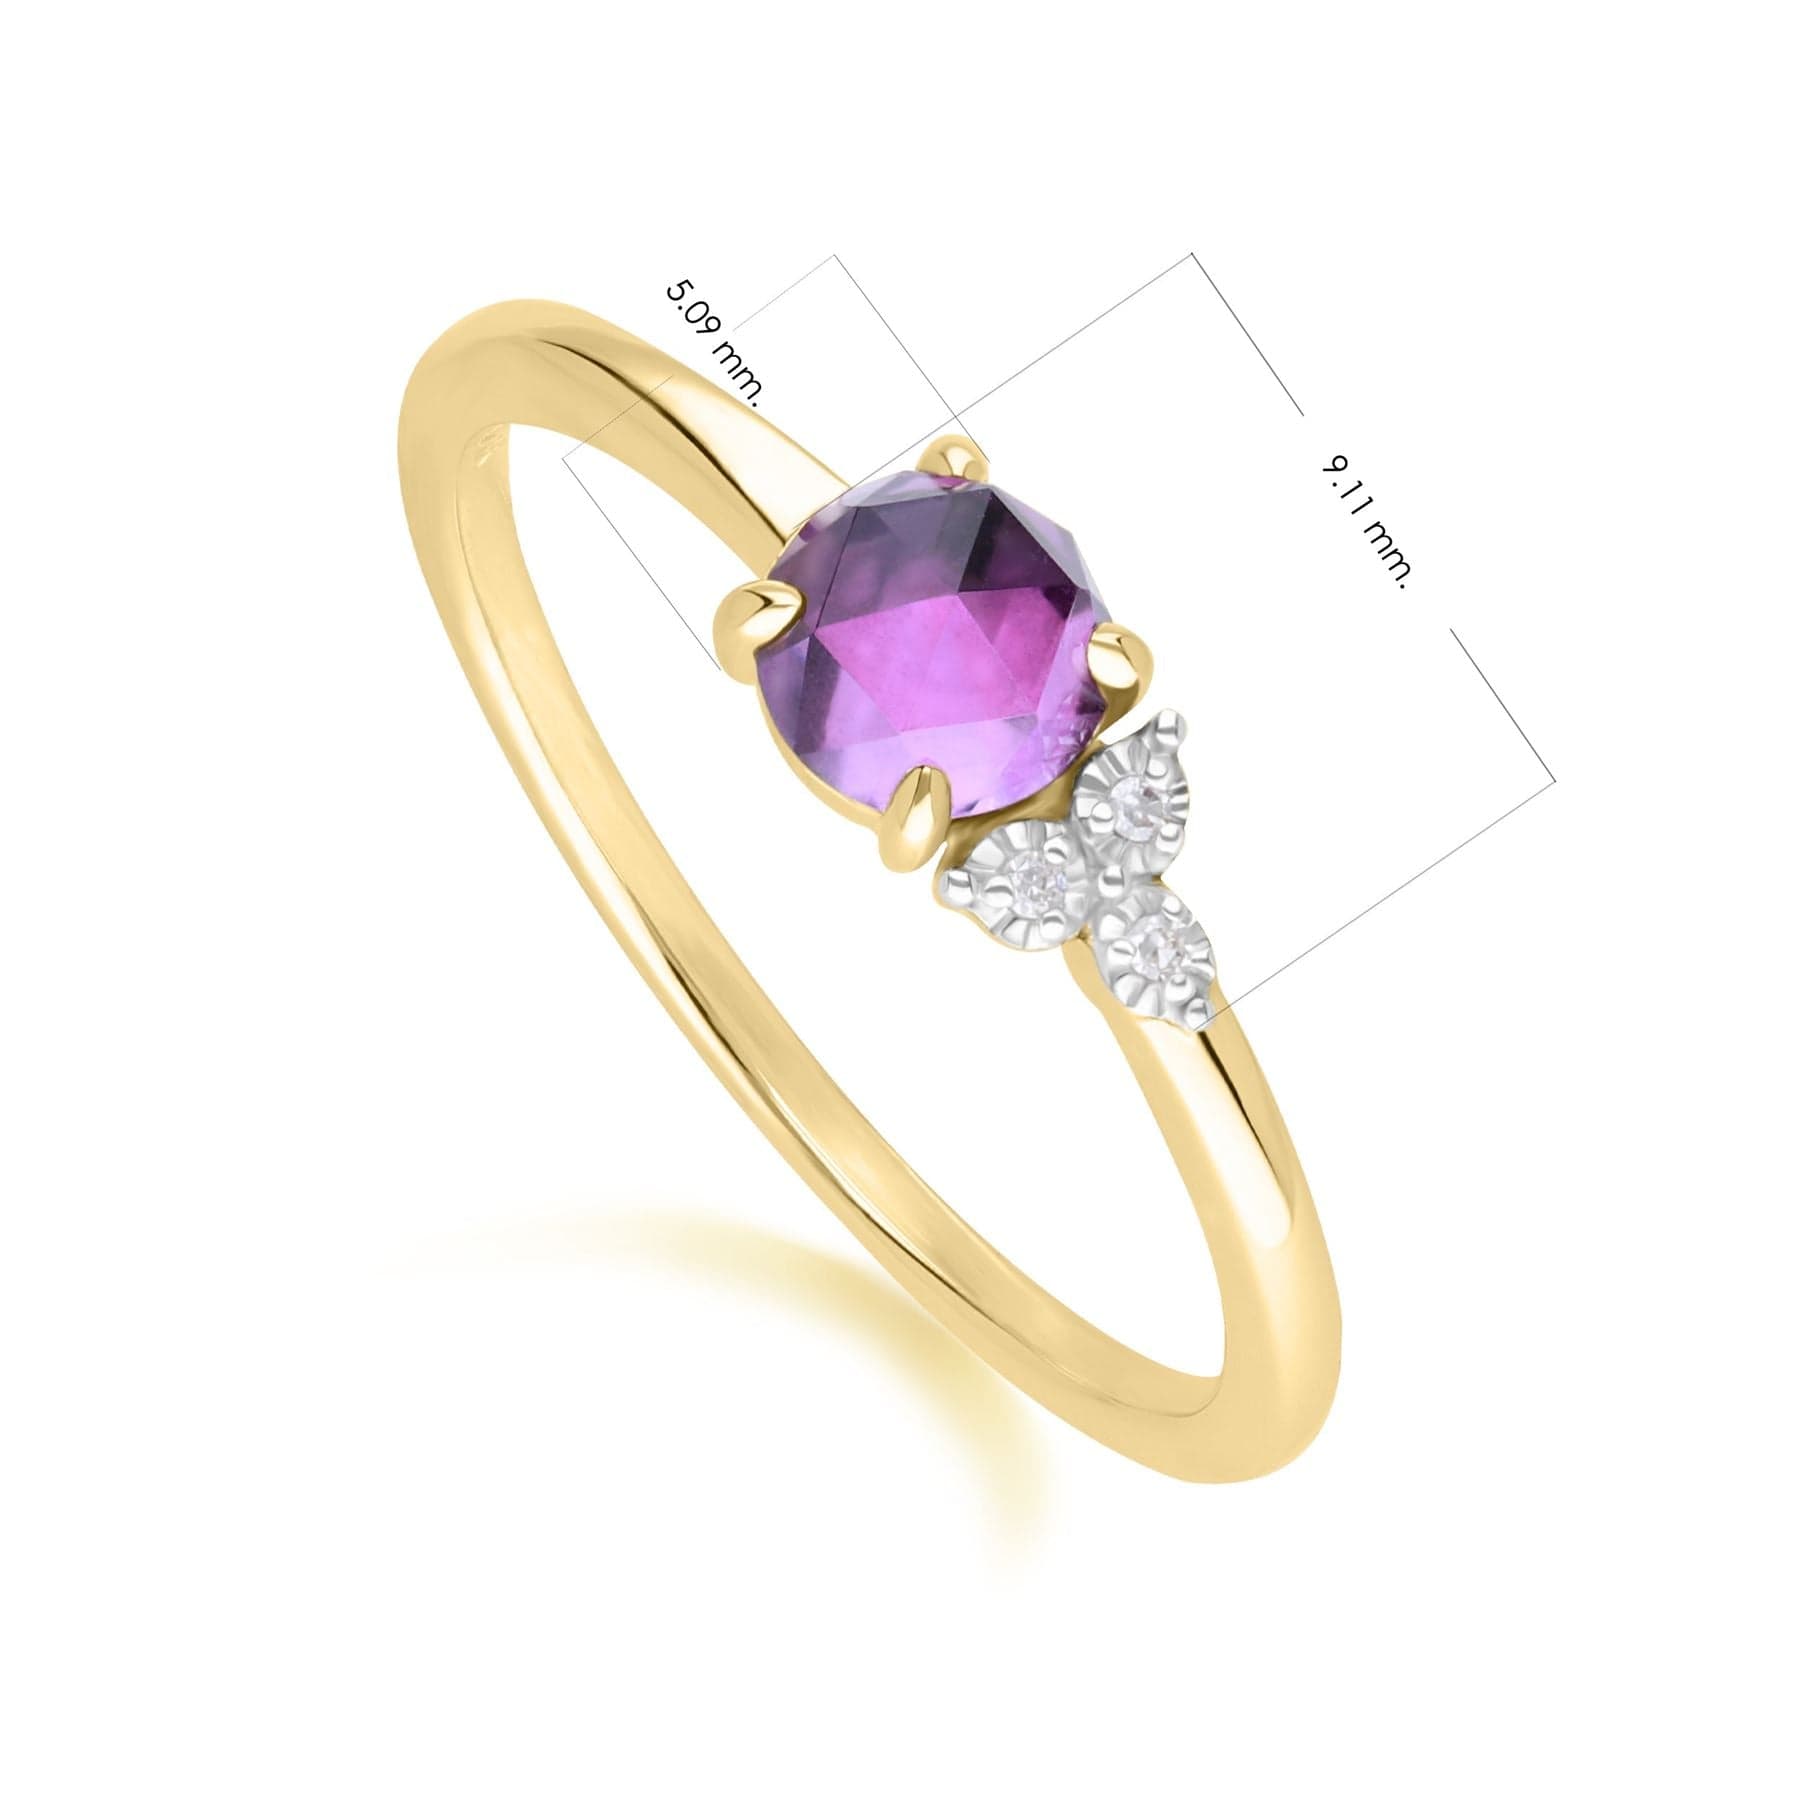 135R2056019 Classic Amethyst & Diamond Ring in 9ct Yellow Gold Dimensions